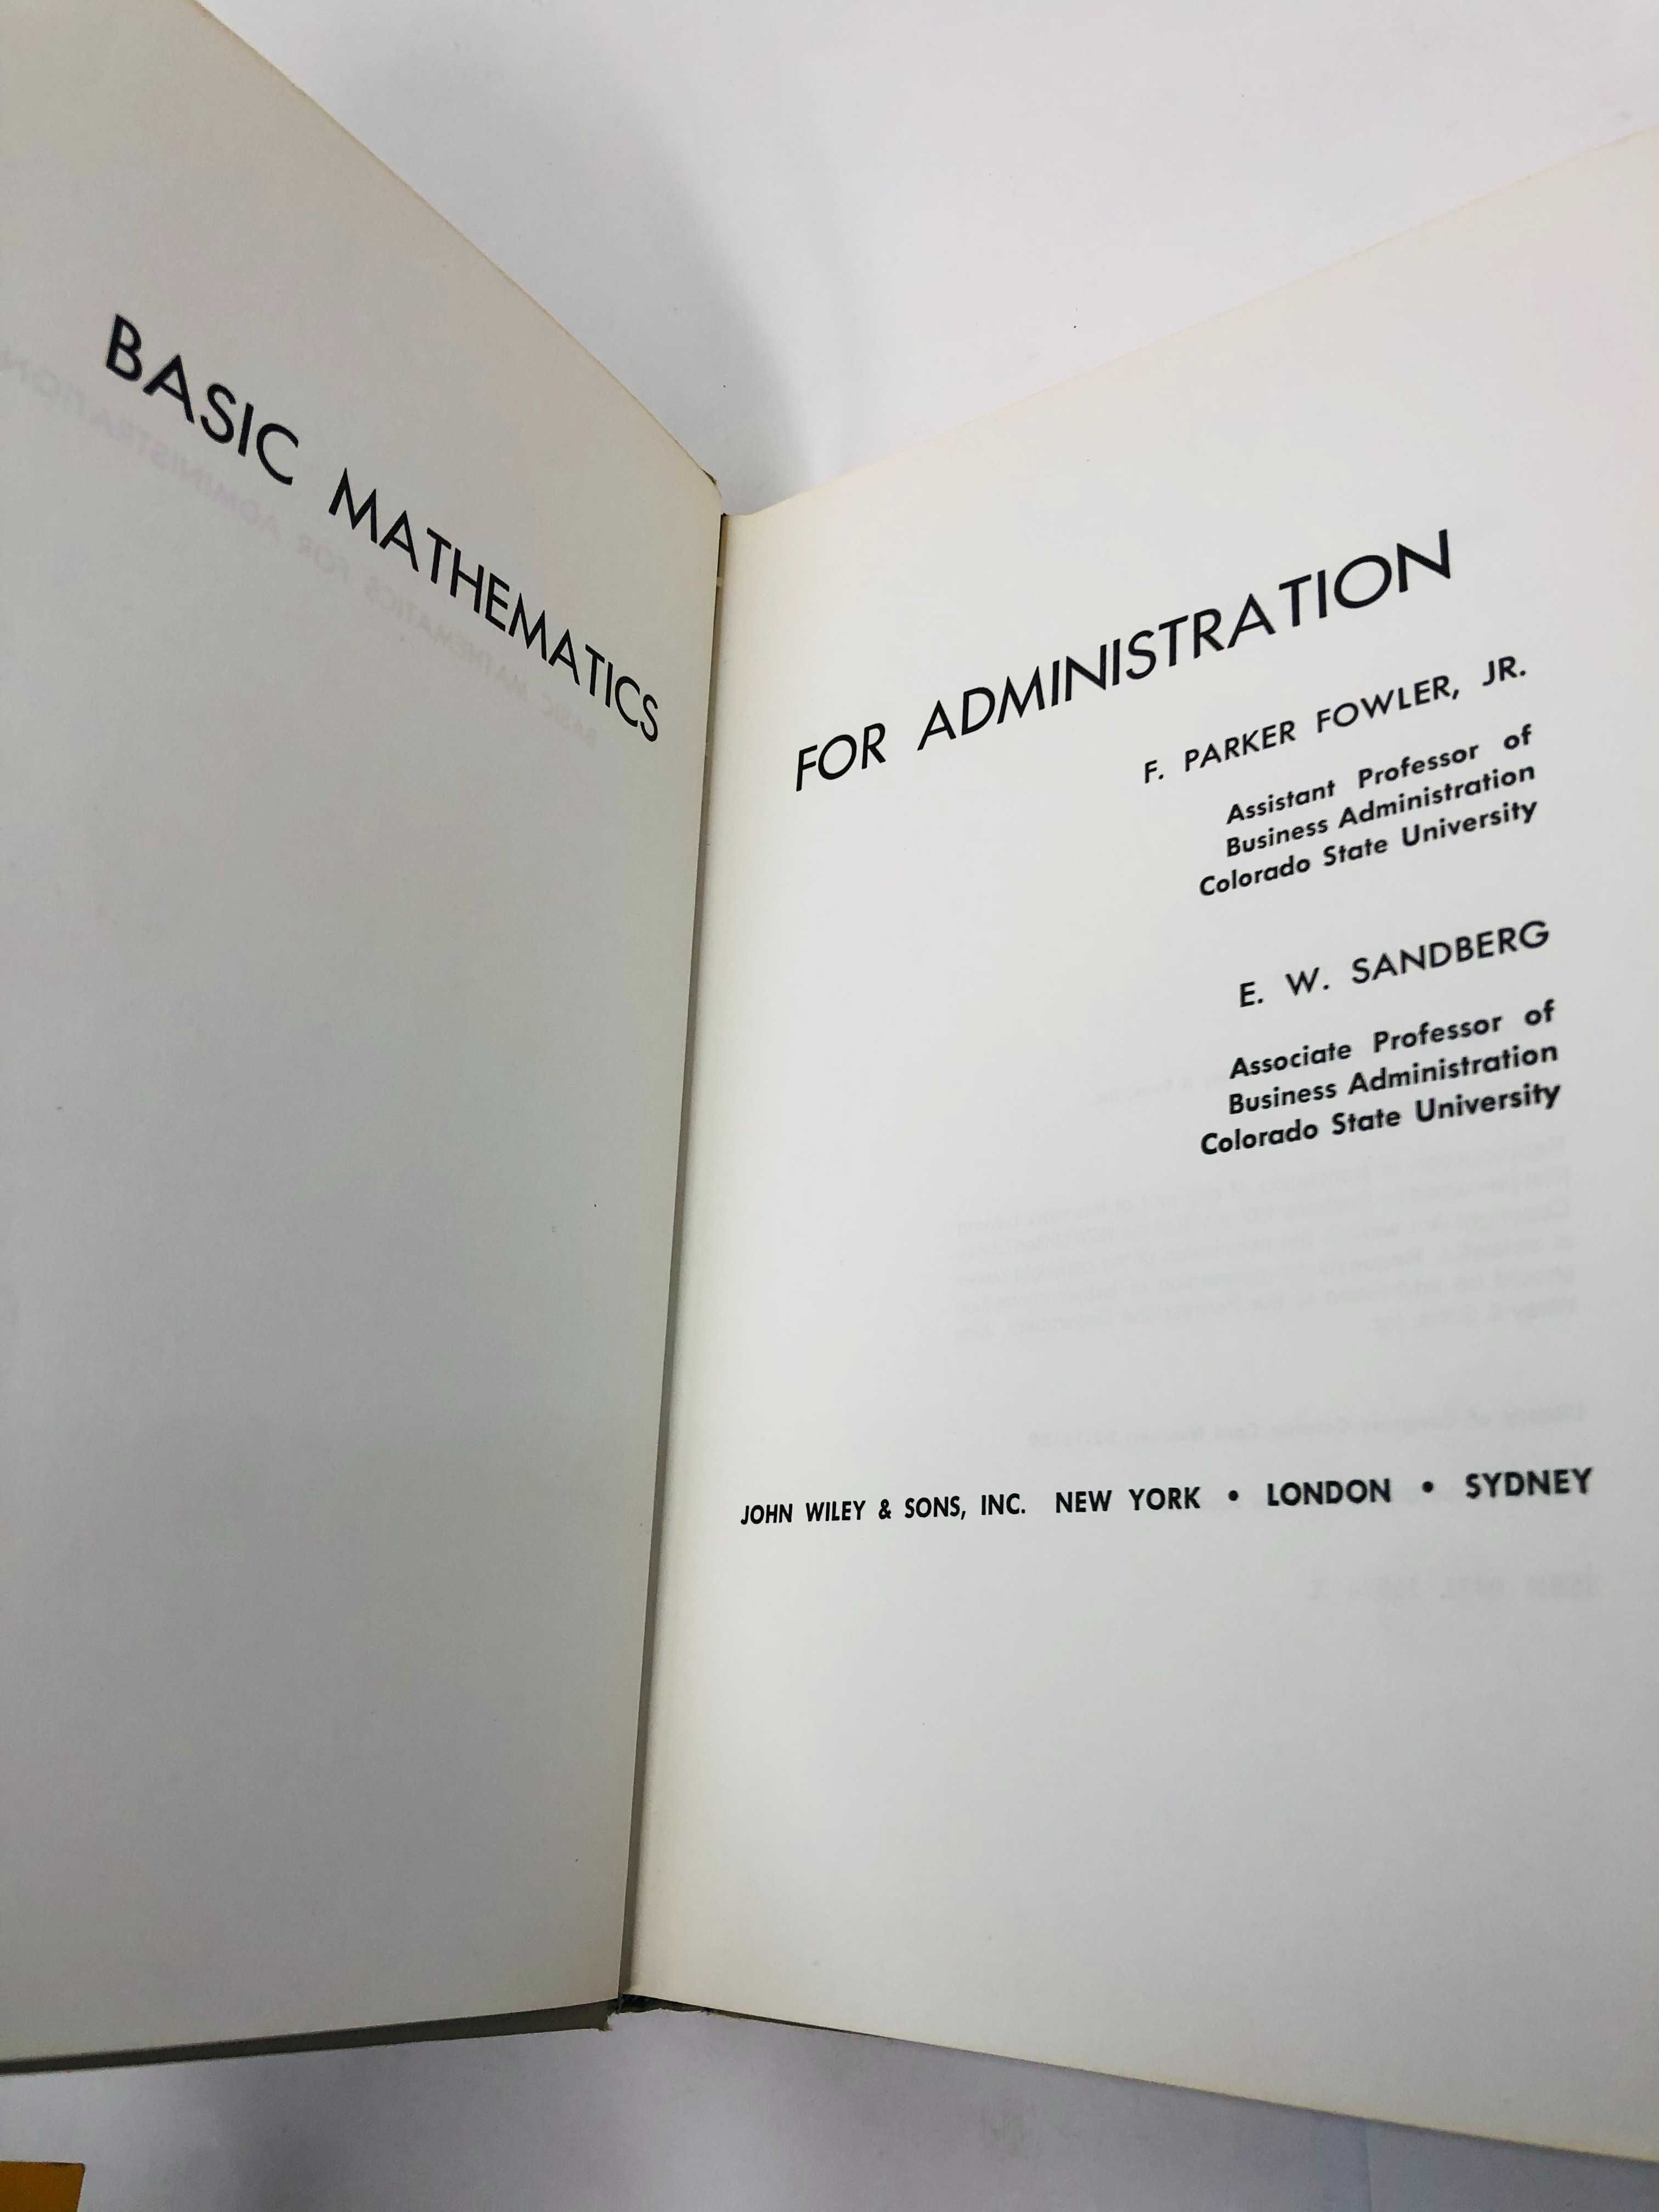 Basic Mathematics For Administration - F. Parker Fowler